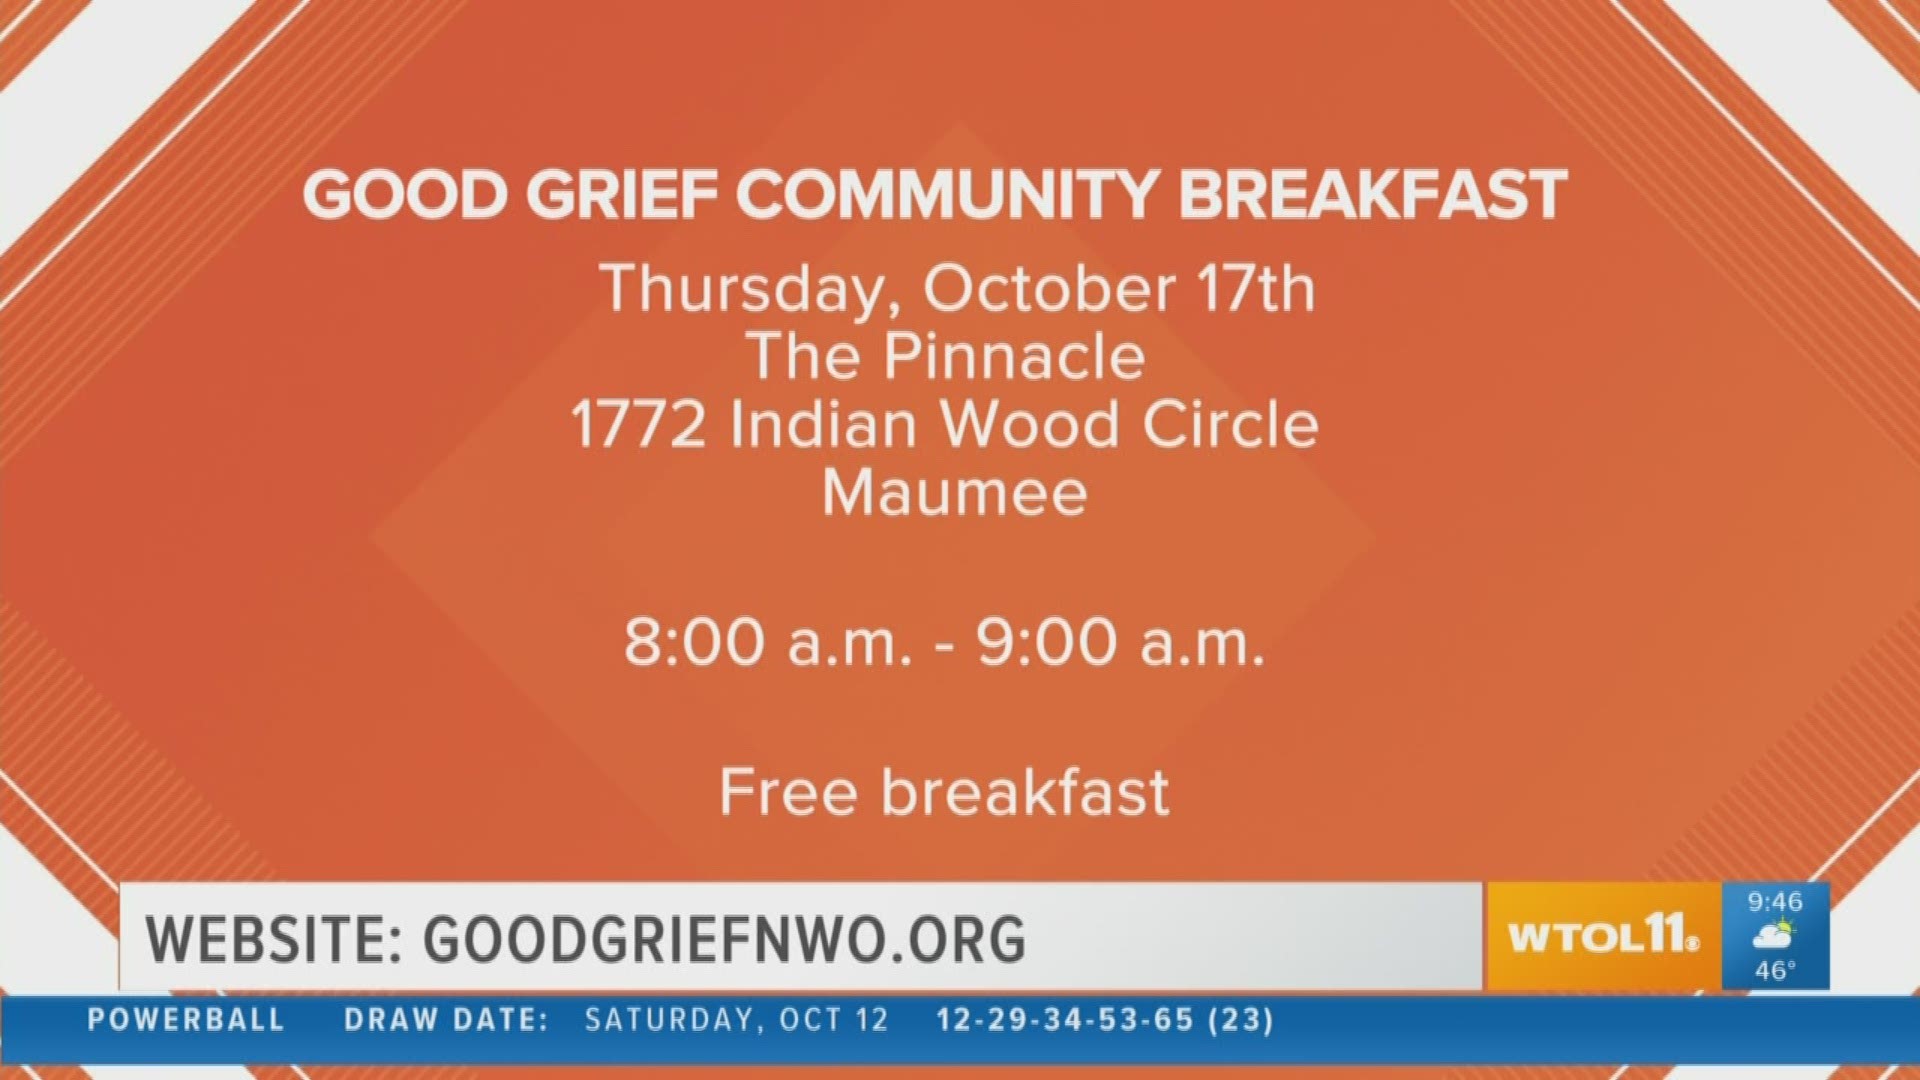 Oct. 17 is the date at The Pinnacle in Maumee. Free breakfast is from 8-9 a.m.